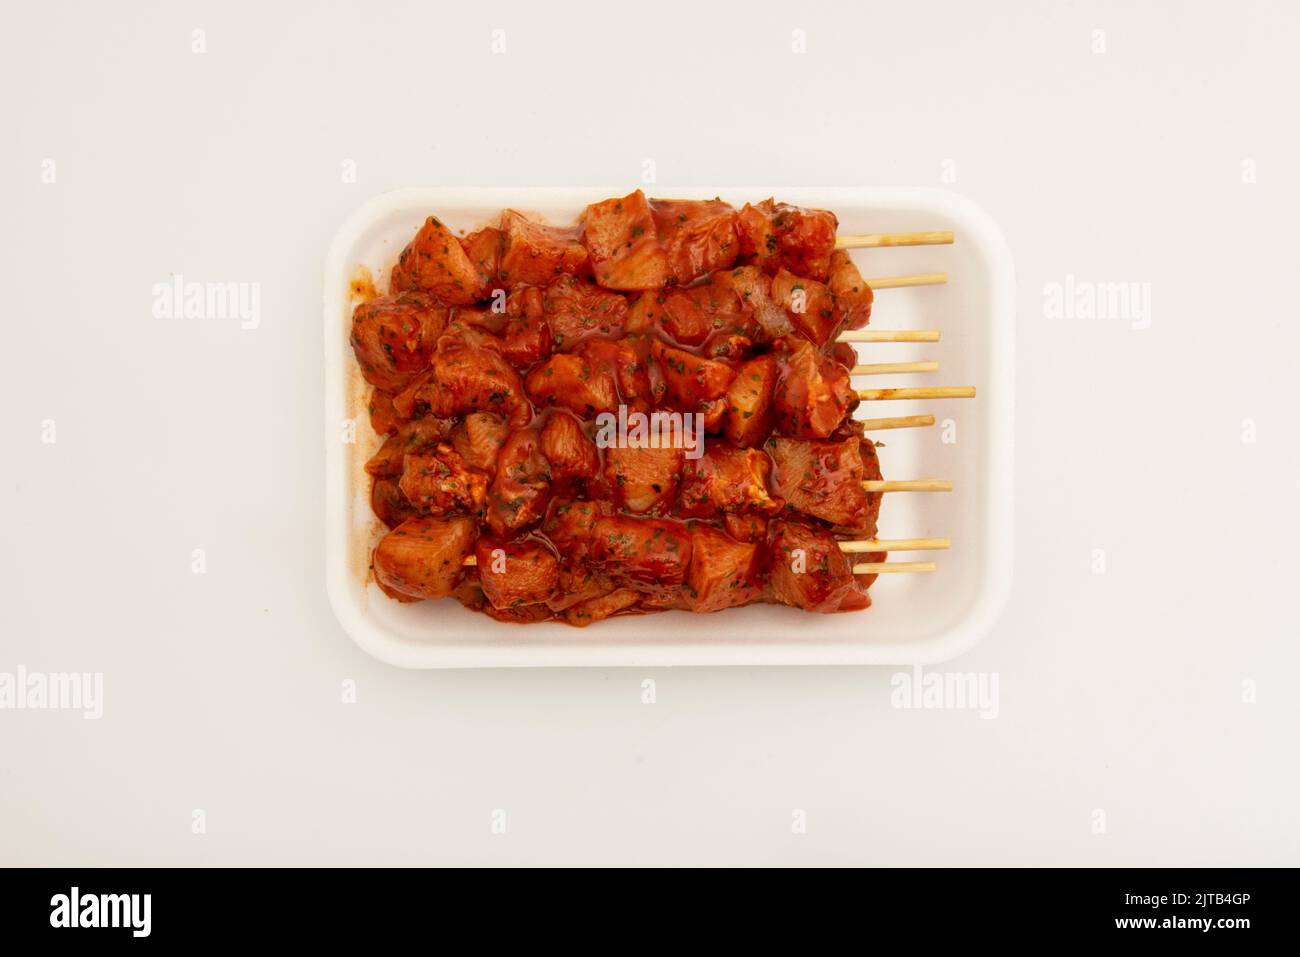 Moorish marinated chicken skewers with wooden sticks on a white polystyrene tray Stock Photo